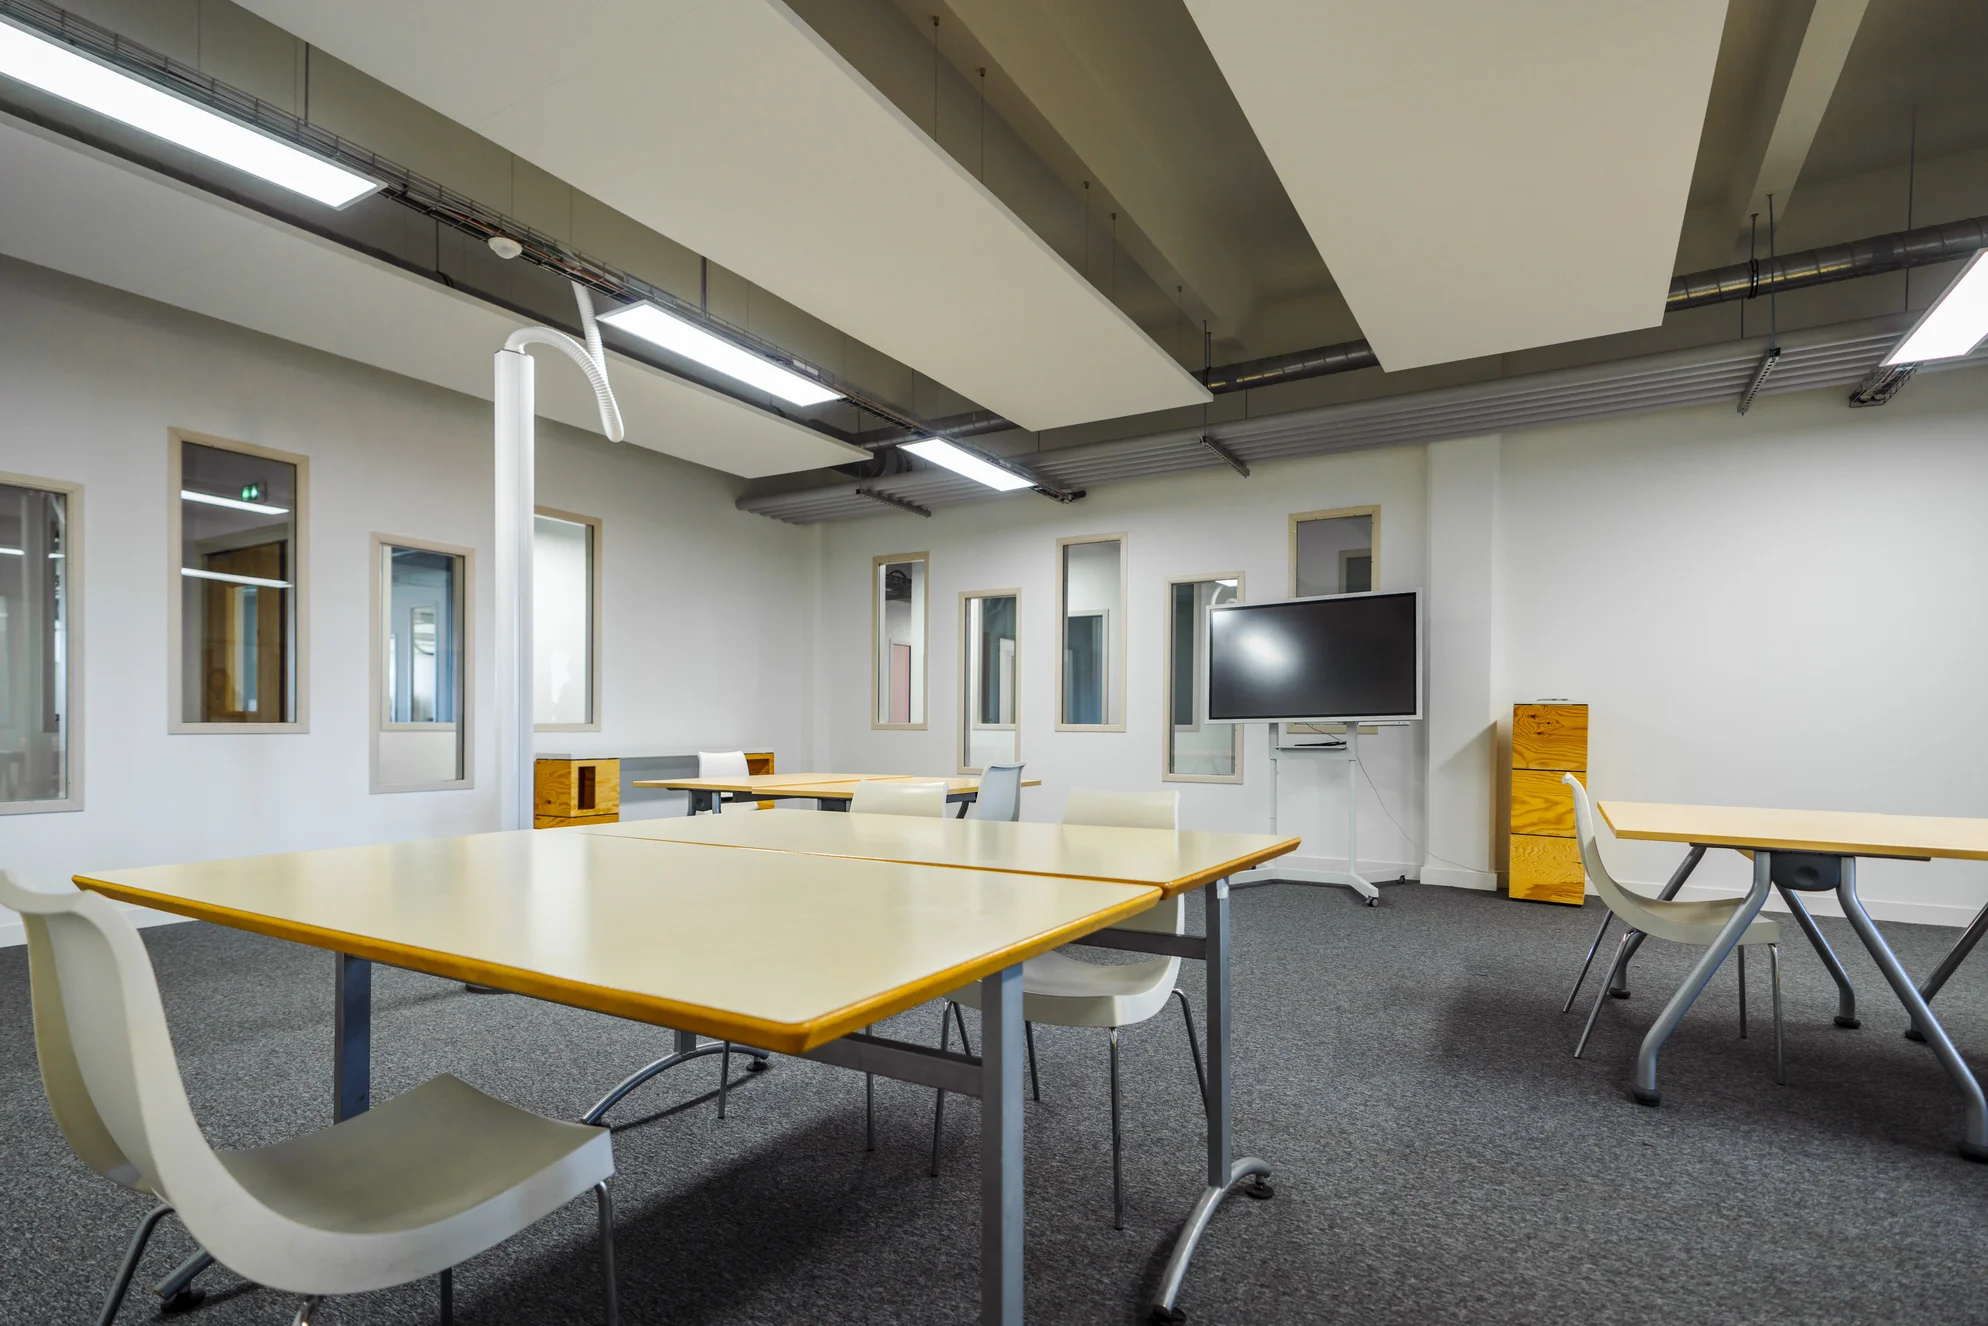 Salle de formation Blanchemaille